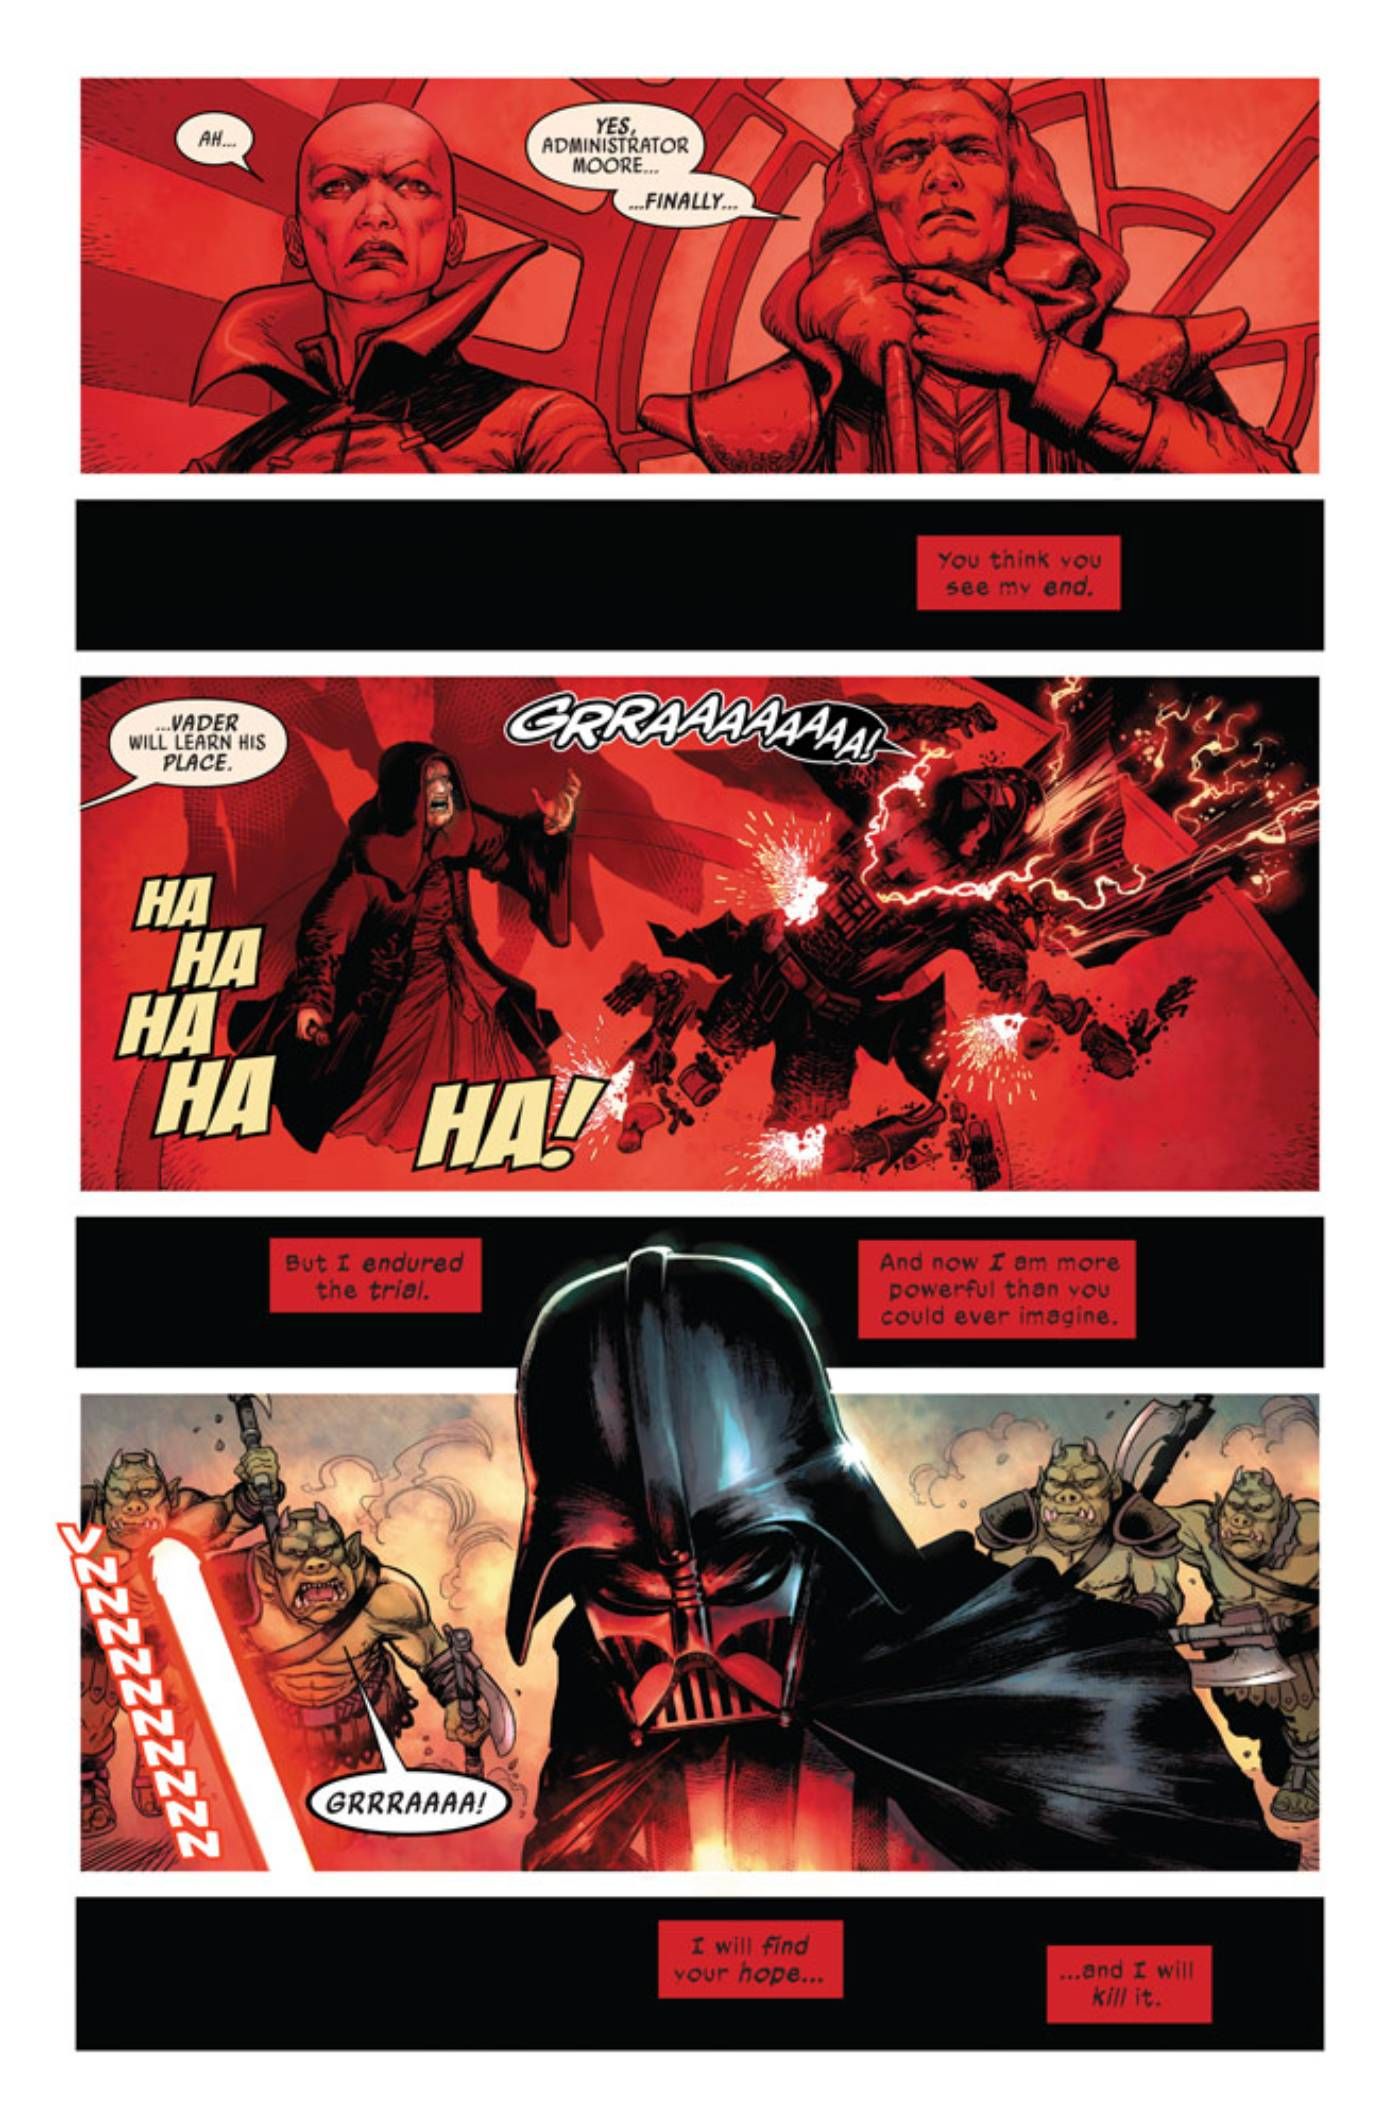 Star Wars Darth Vader Goes HeadtoHead With Empires IG88